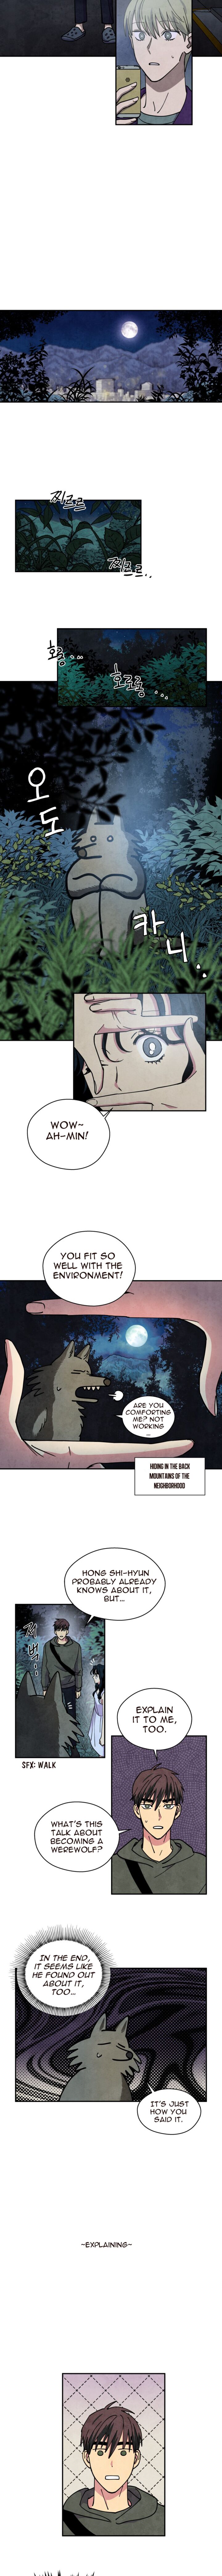 The Little Red Riding Hood Chapter 23 Page 5